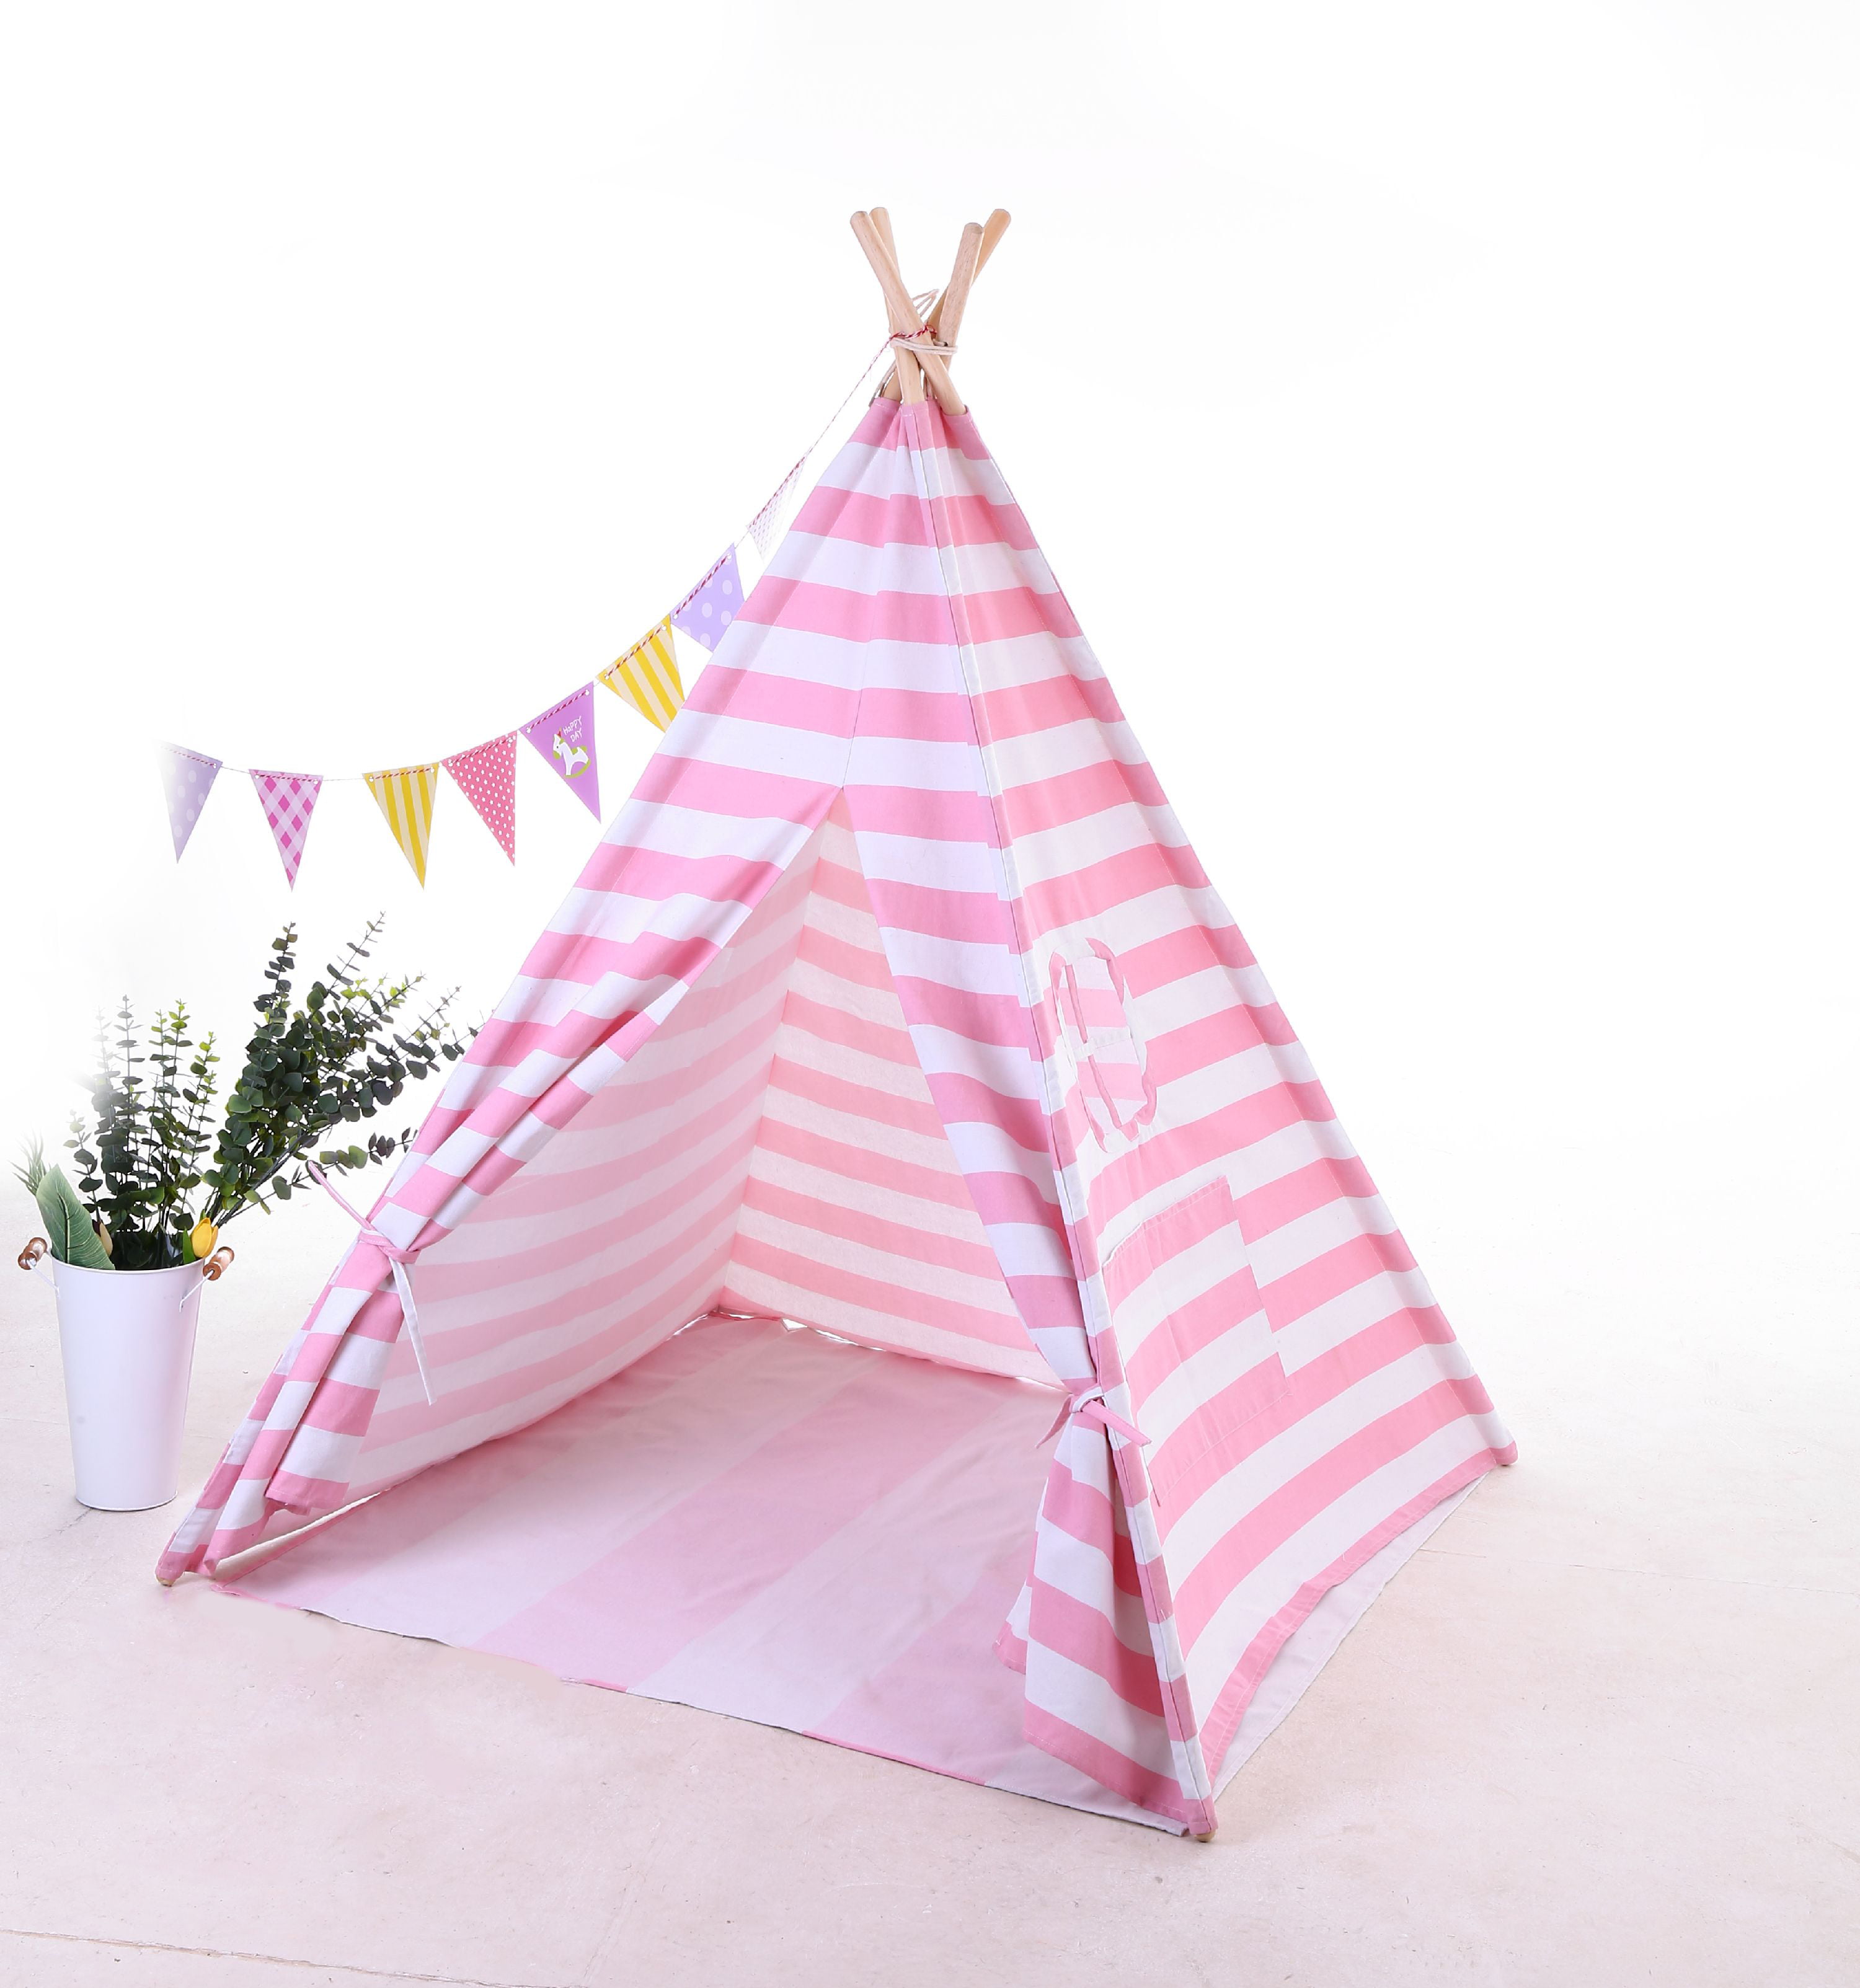 Funkatron Indoor Indian Playhouse Toy Teepee Play Tent for Kids Toddlers Canvas with Carry Case Pink Stripe 